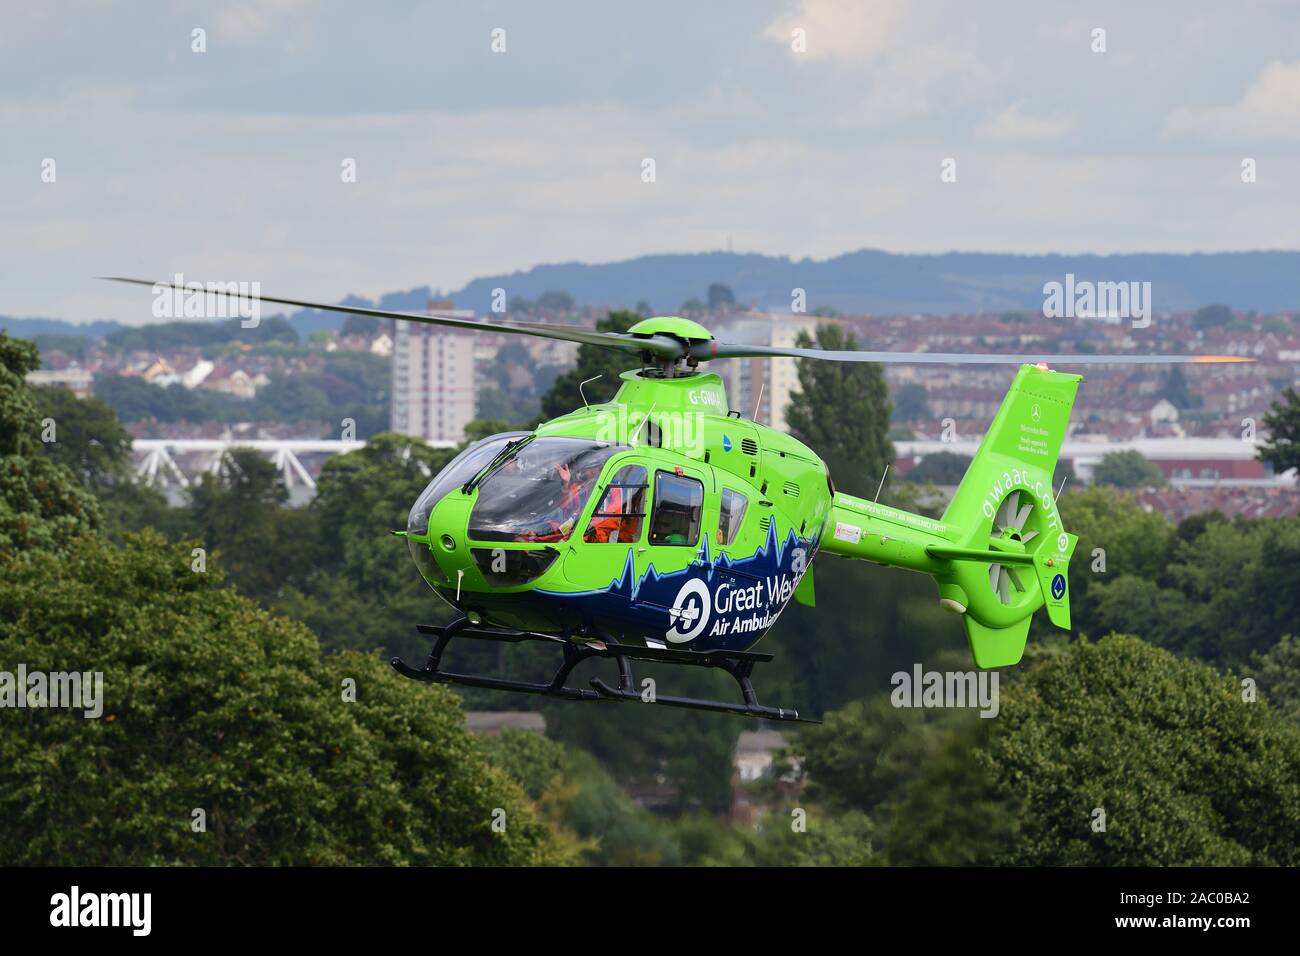 Close up of Great Western air ambulance helicopter in flight with Bristol city in the background Stock Photo